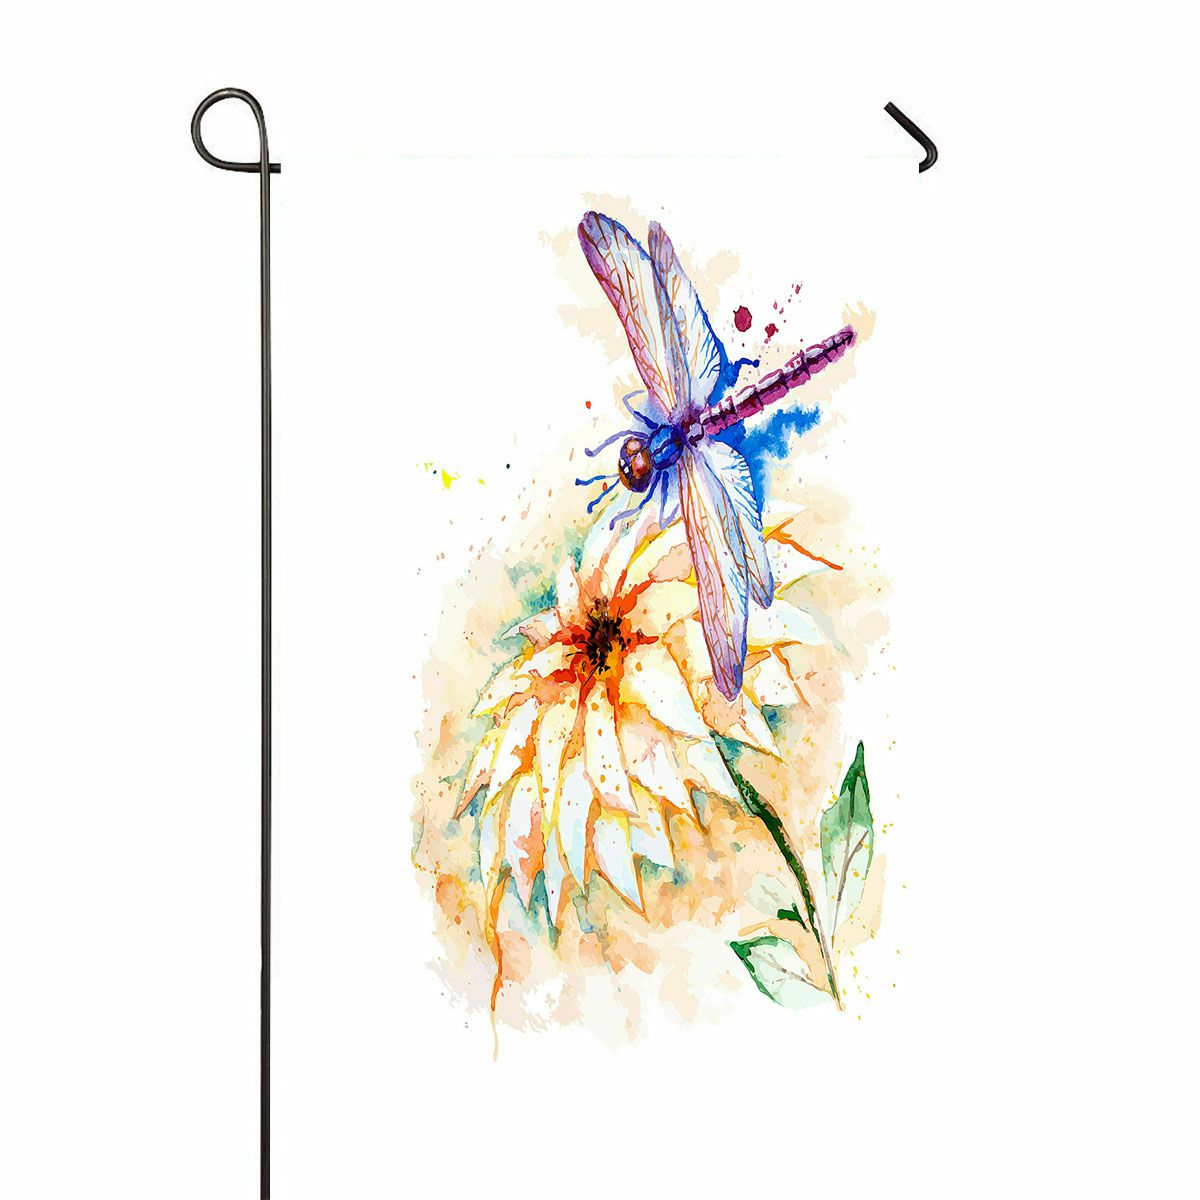 ABPHQTO Beautiful Watercolor Flying Violet Dragonfly Lily Flower Home Outdoor Garden Flag House Banner Size 28x40 Inch - image 1 of 1